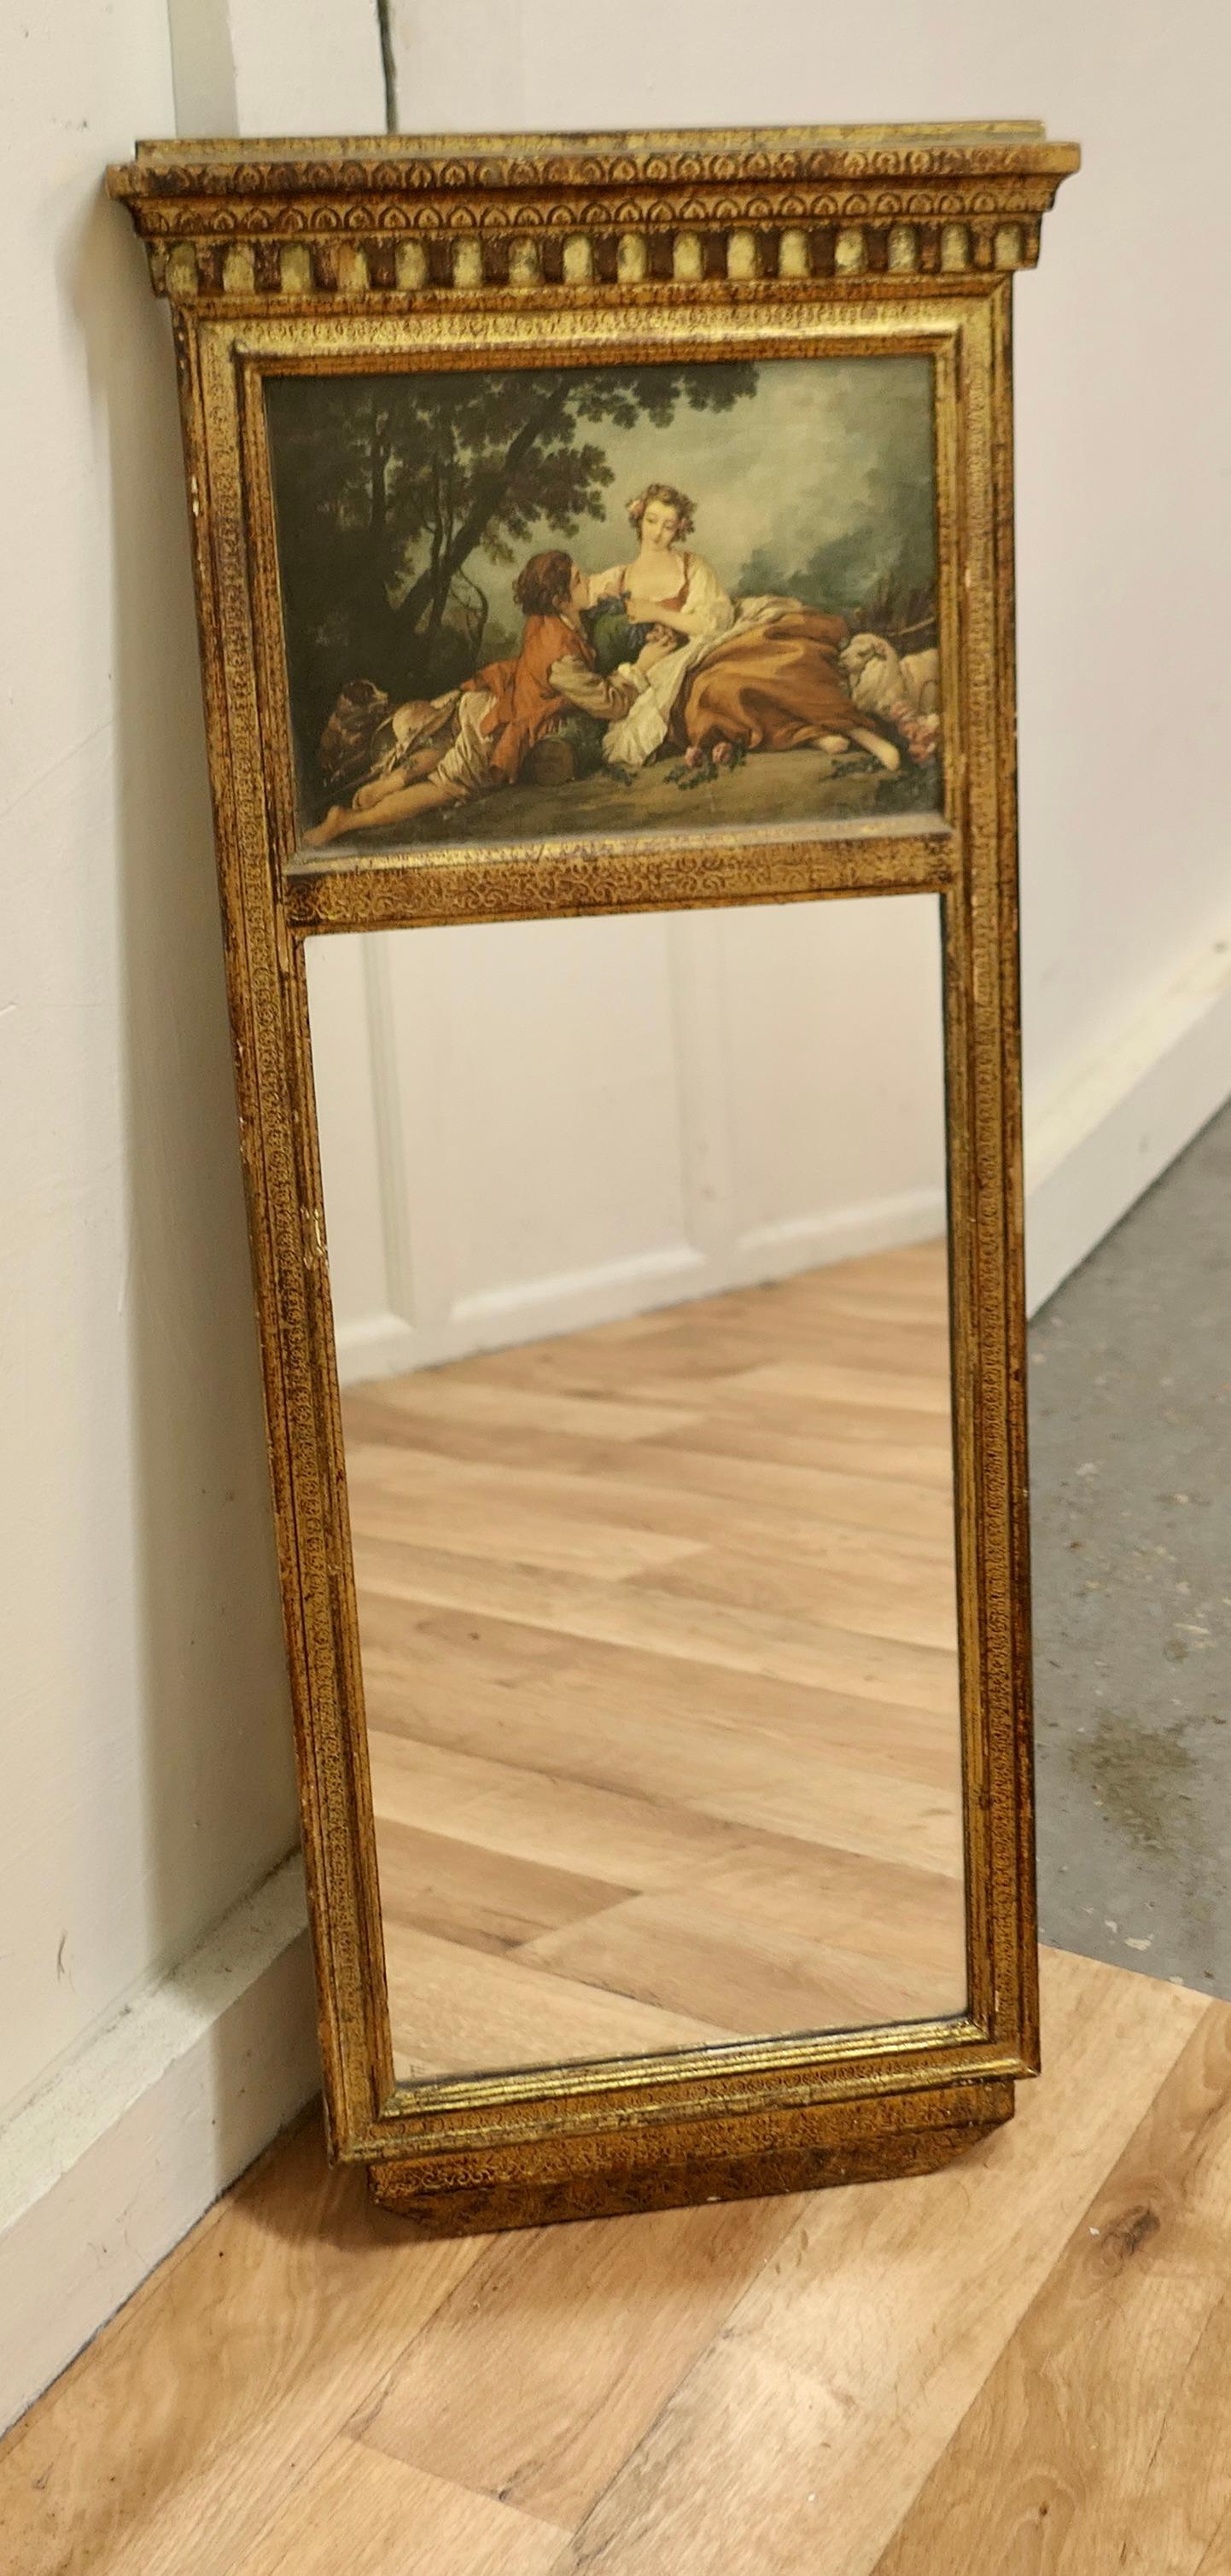 A Petite 19th Century French Gilt Trumeau mirror

19th Century Gilt Wall Mirror with a picture of a Shepherdess and her admirer enjoying the countryside and beneath is a rectangular mirror. 
The mirror has a decorative age darkened gilt frame,